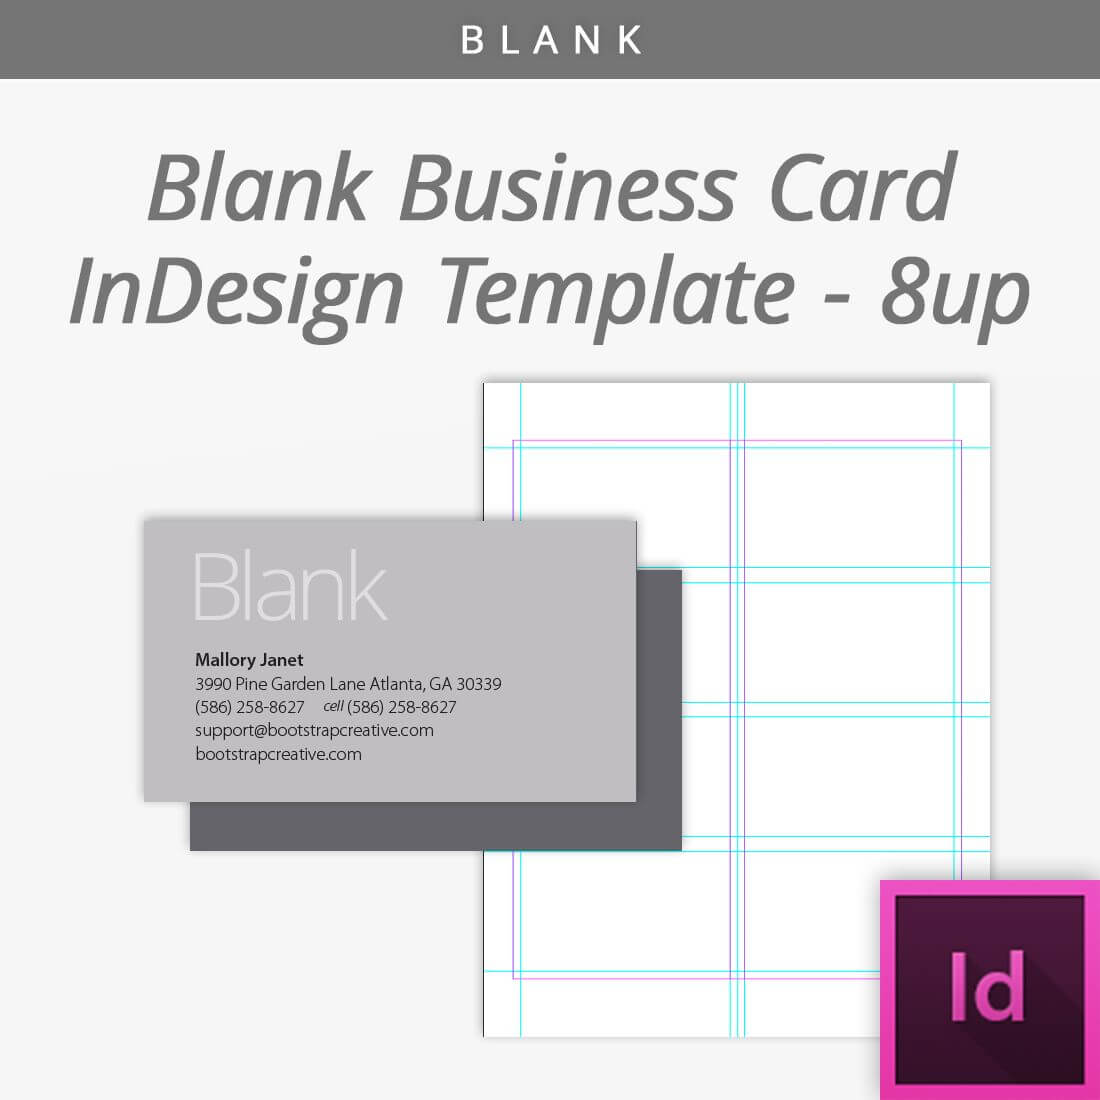 Bootstrap Creative | Blank Business Cards, Free Business Inside Blank Business Card Template Download